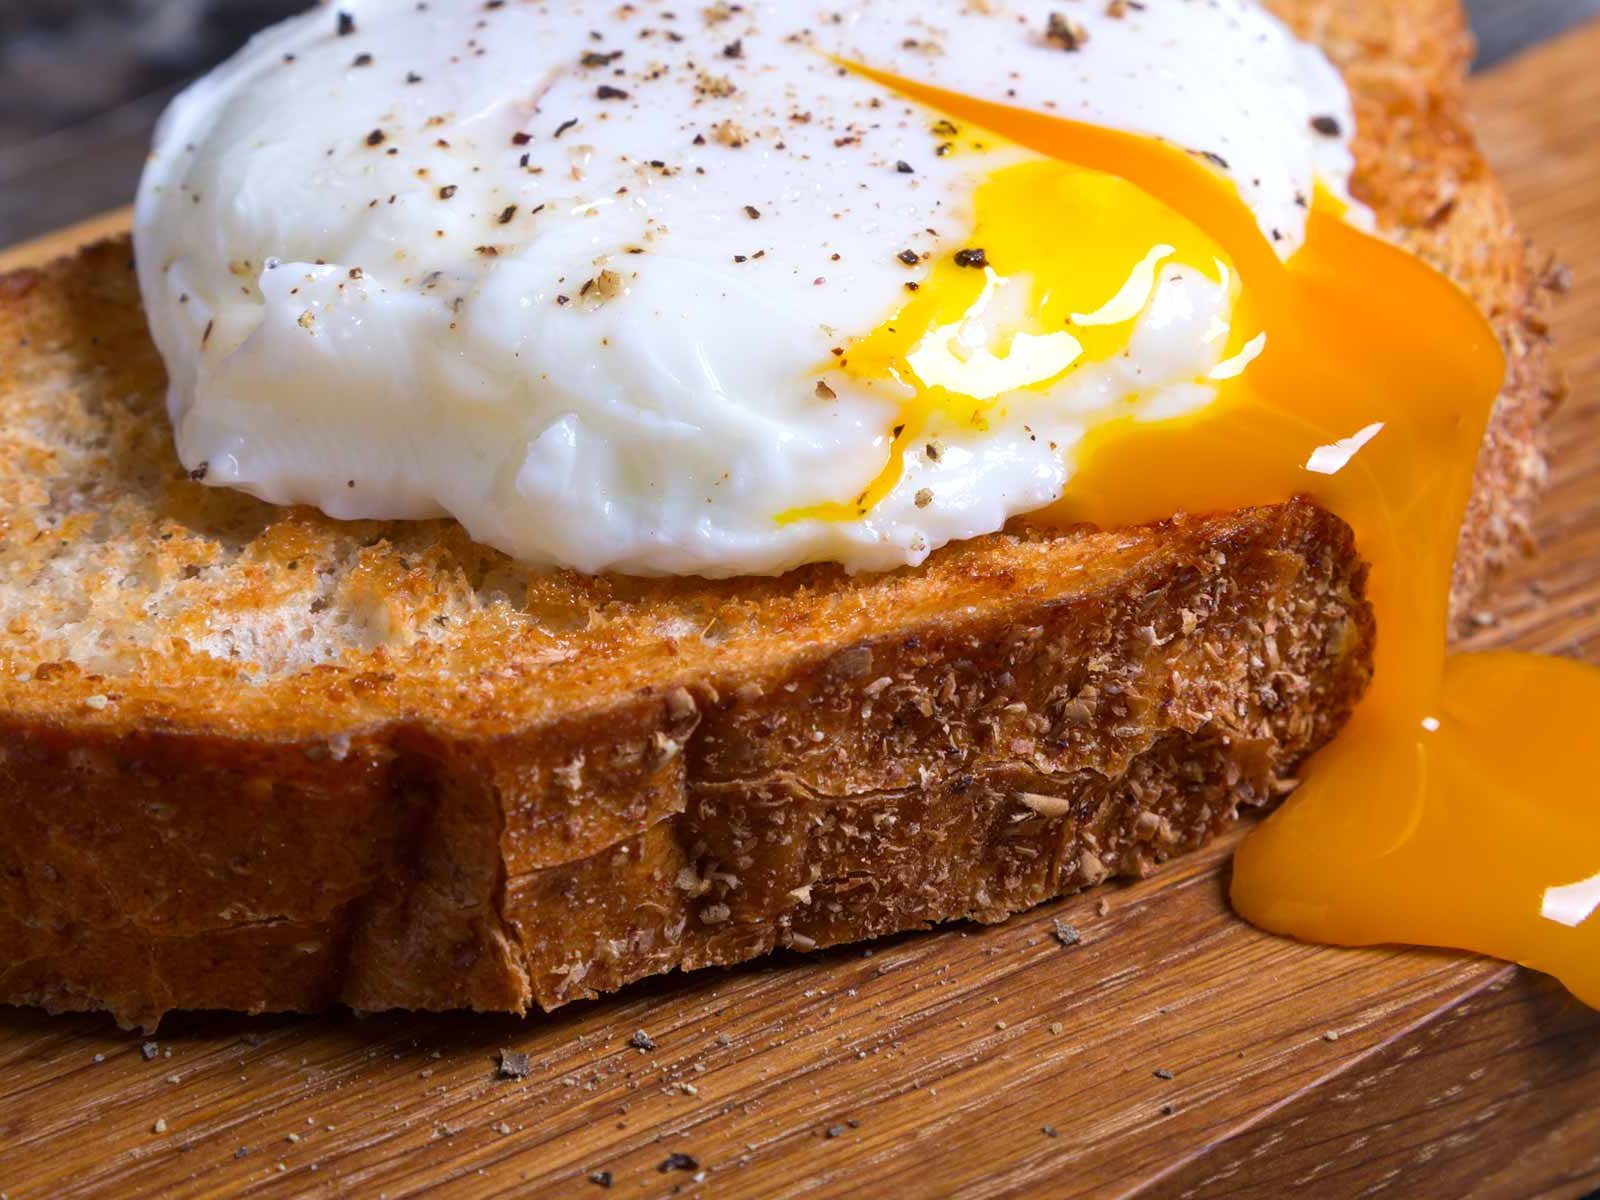 Poached egg on toast is a tried and tested combination.